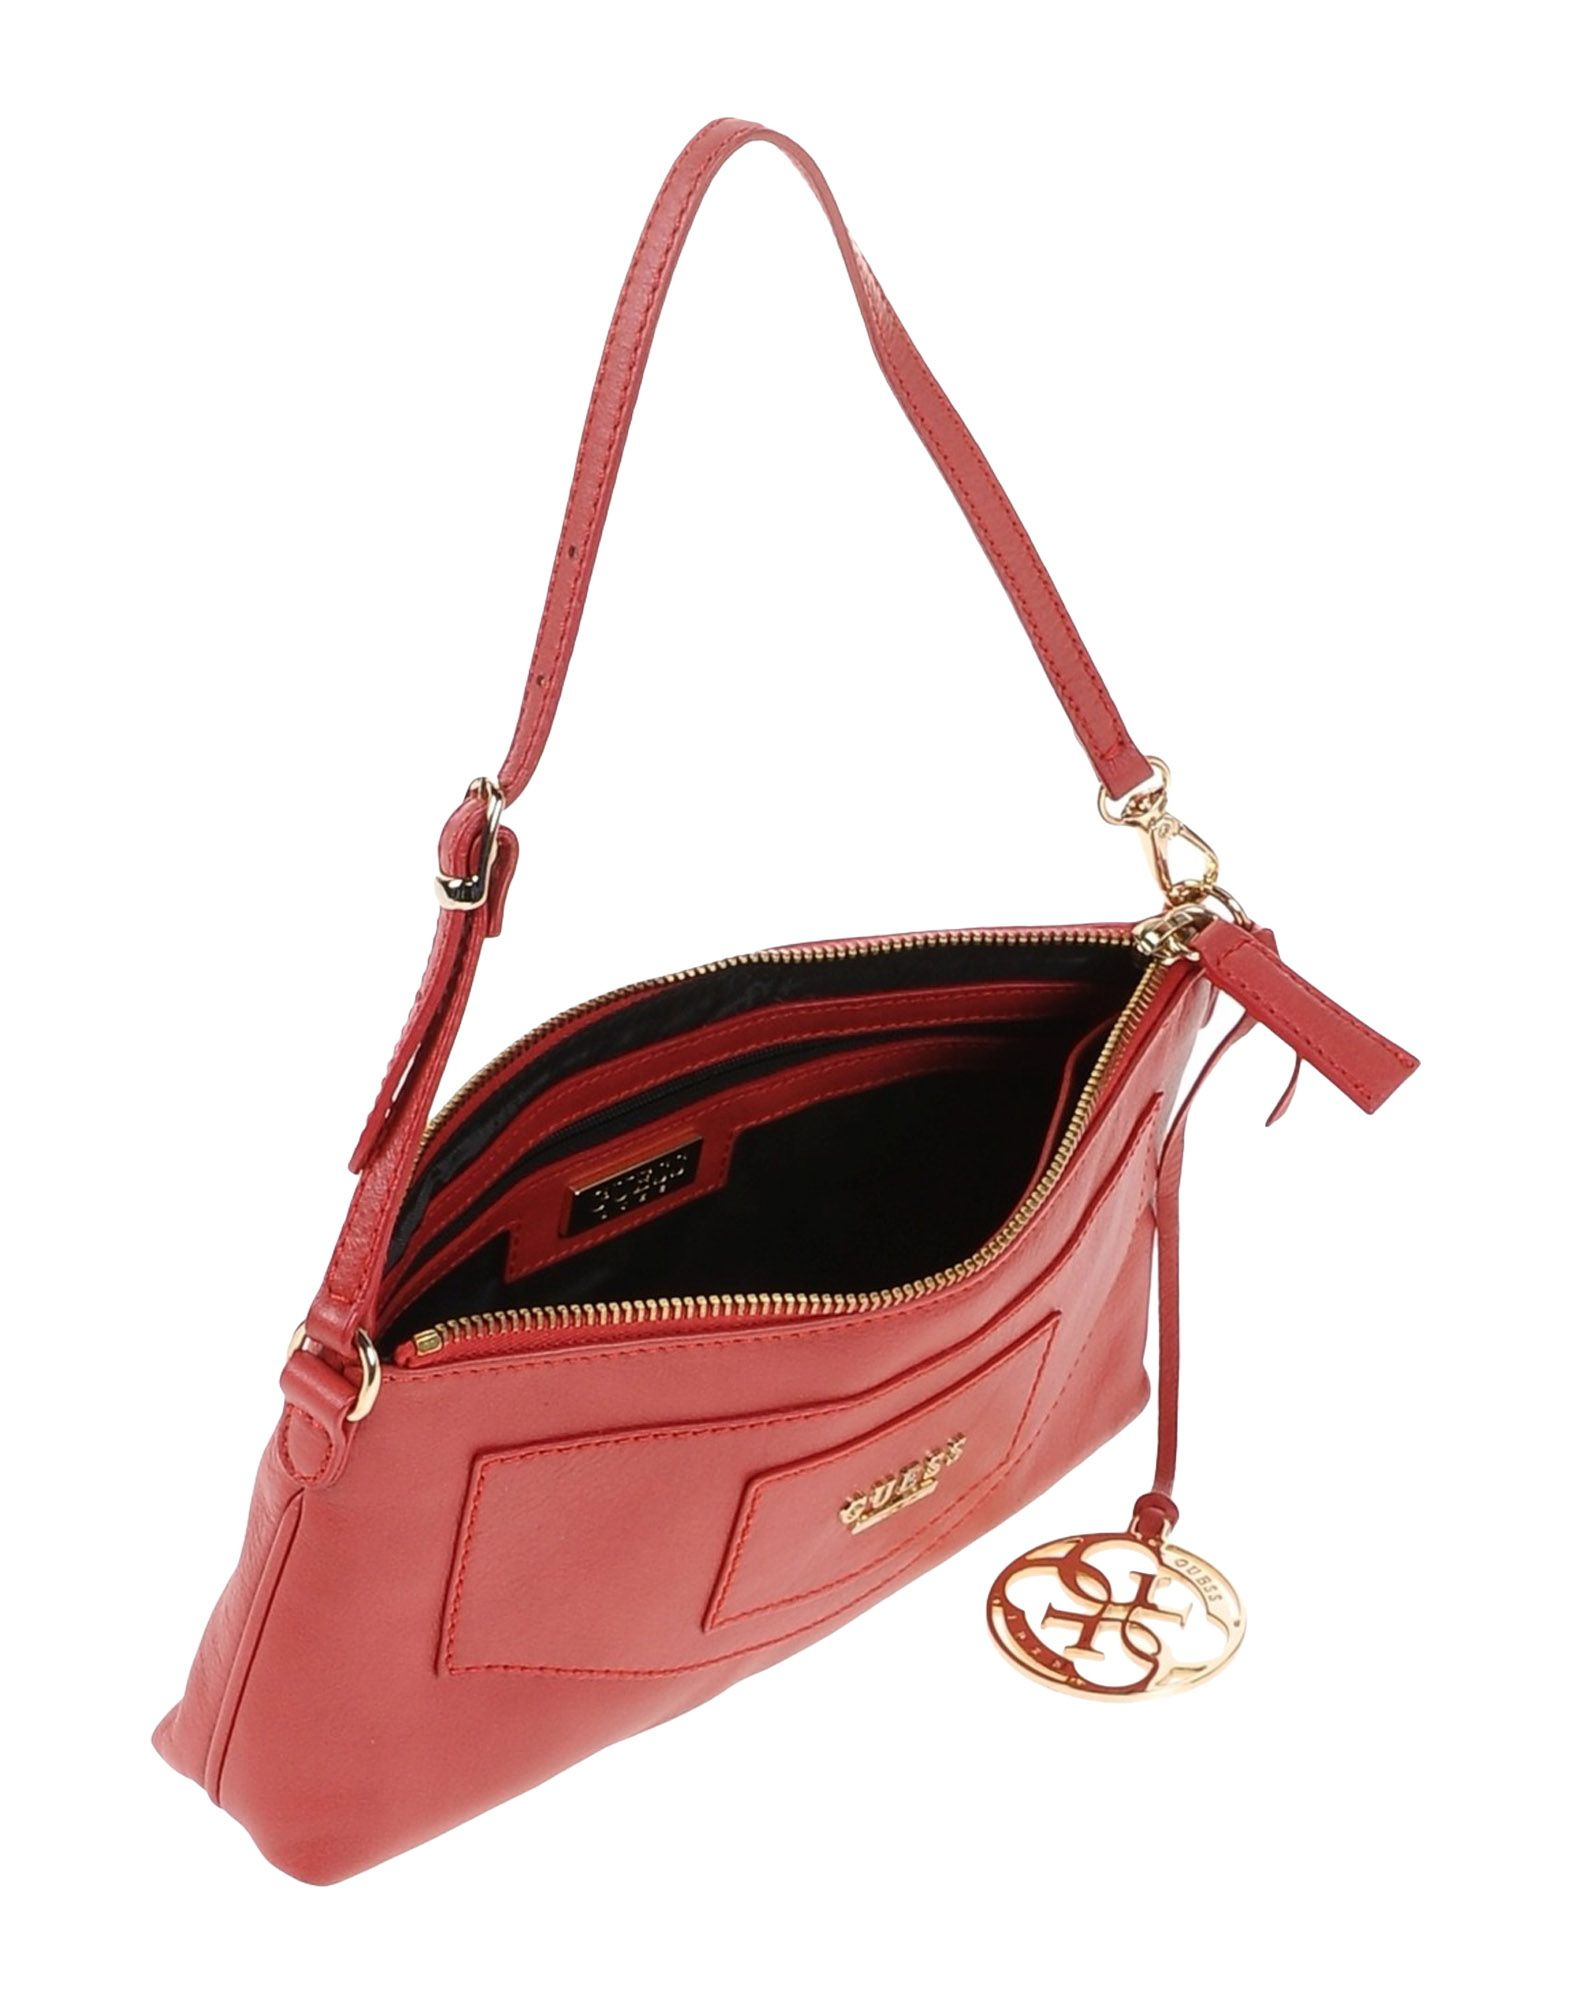 Lyst - Guess Handbag in Red